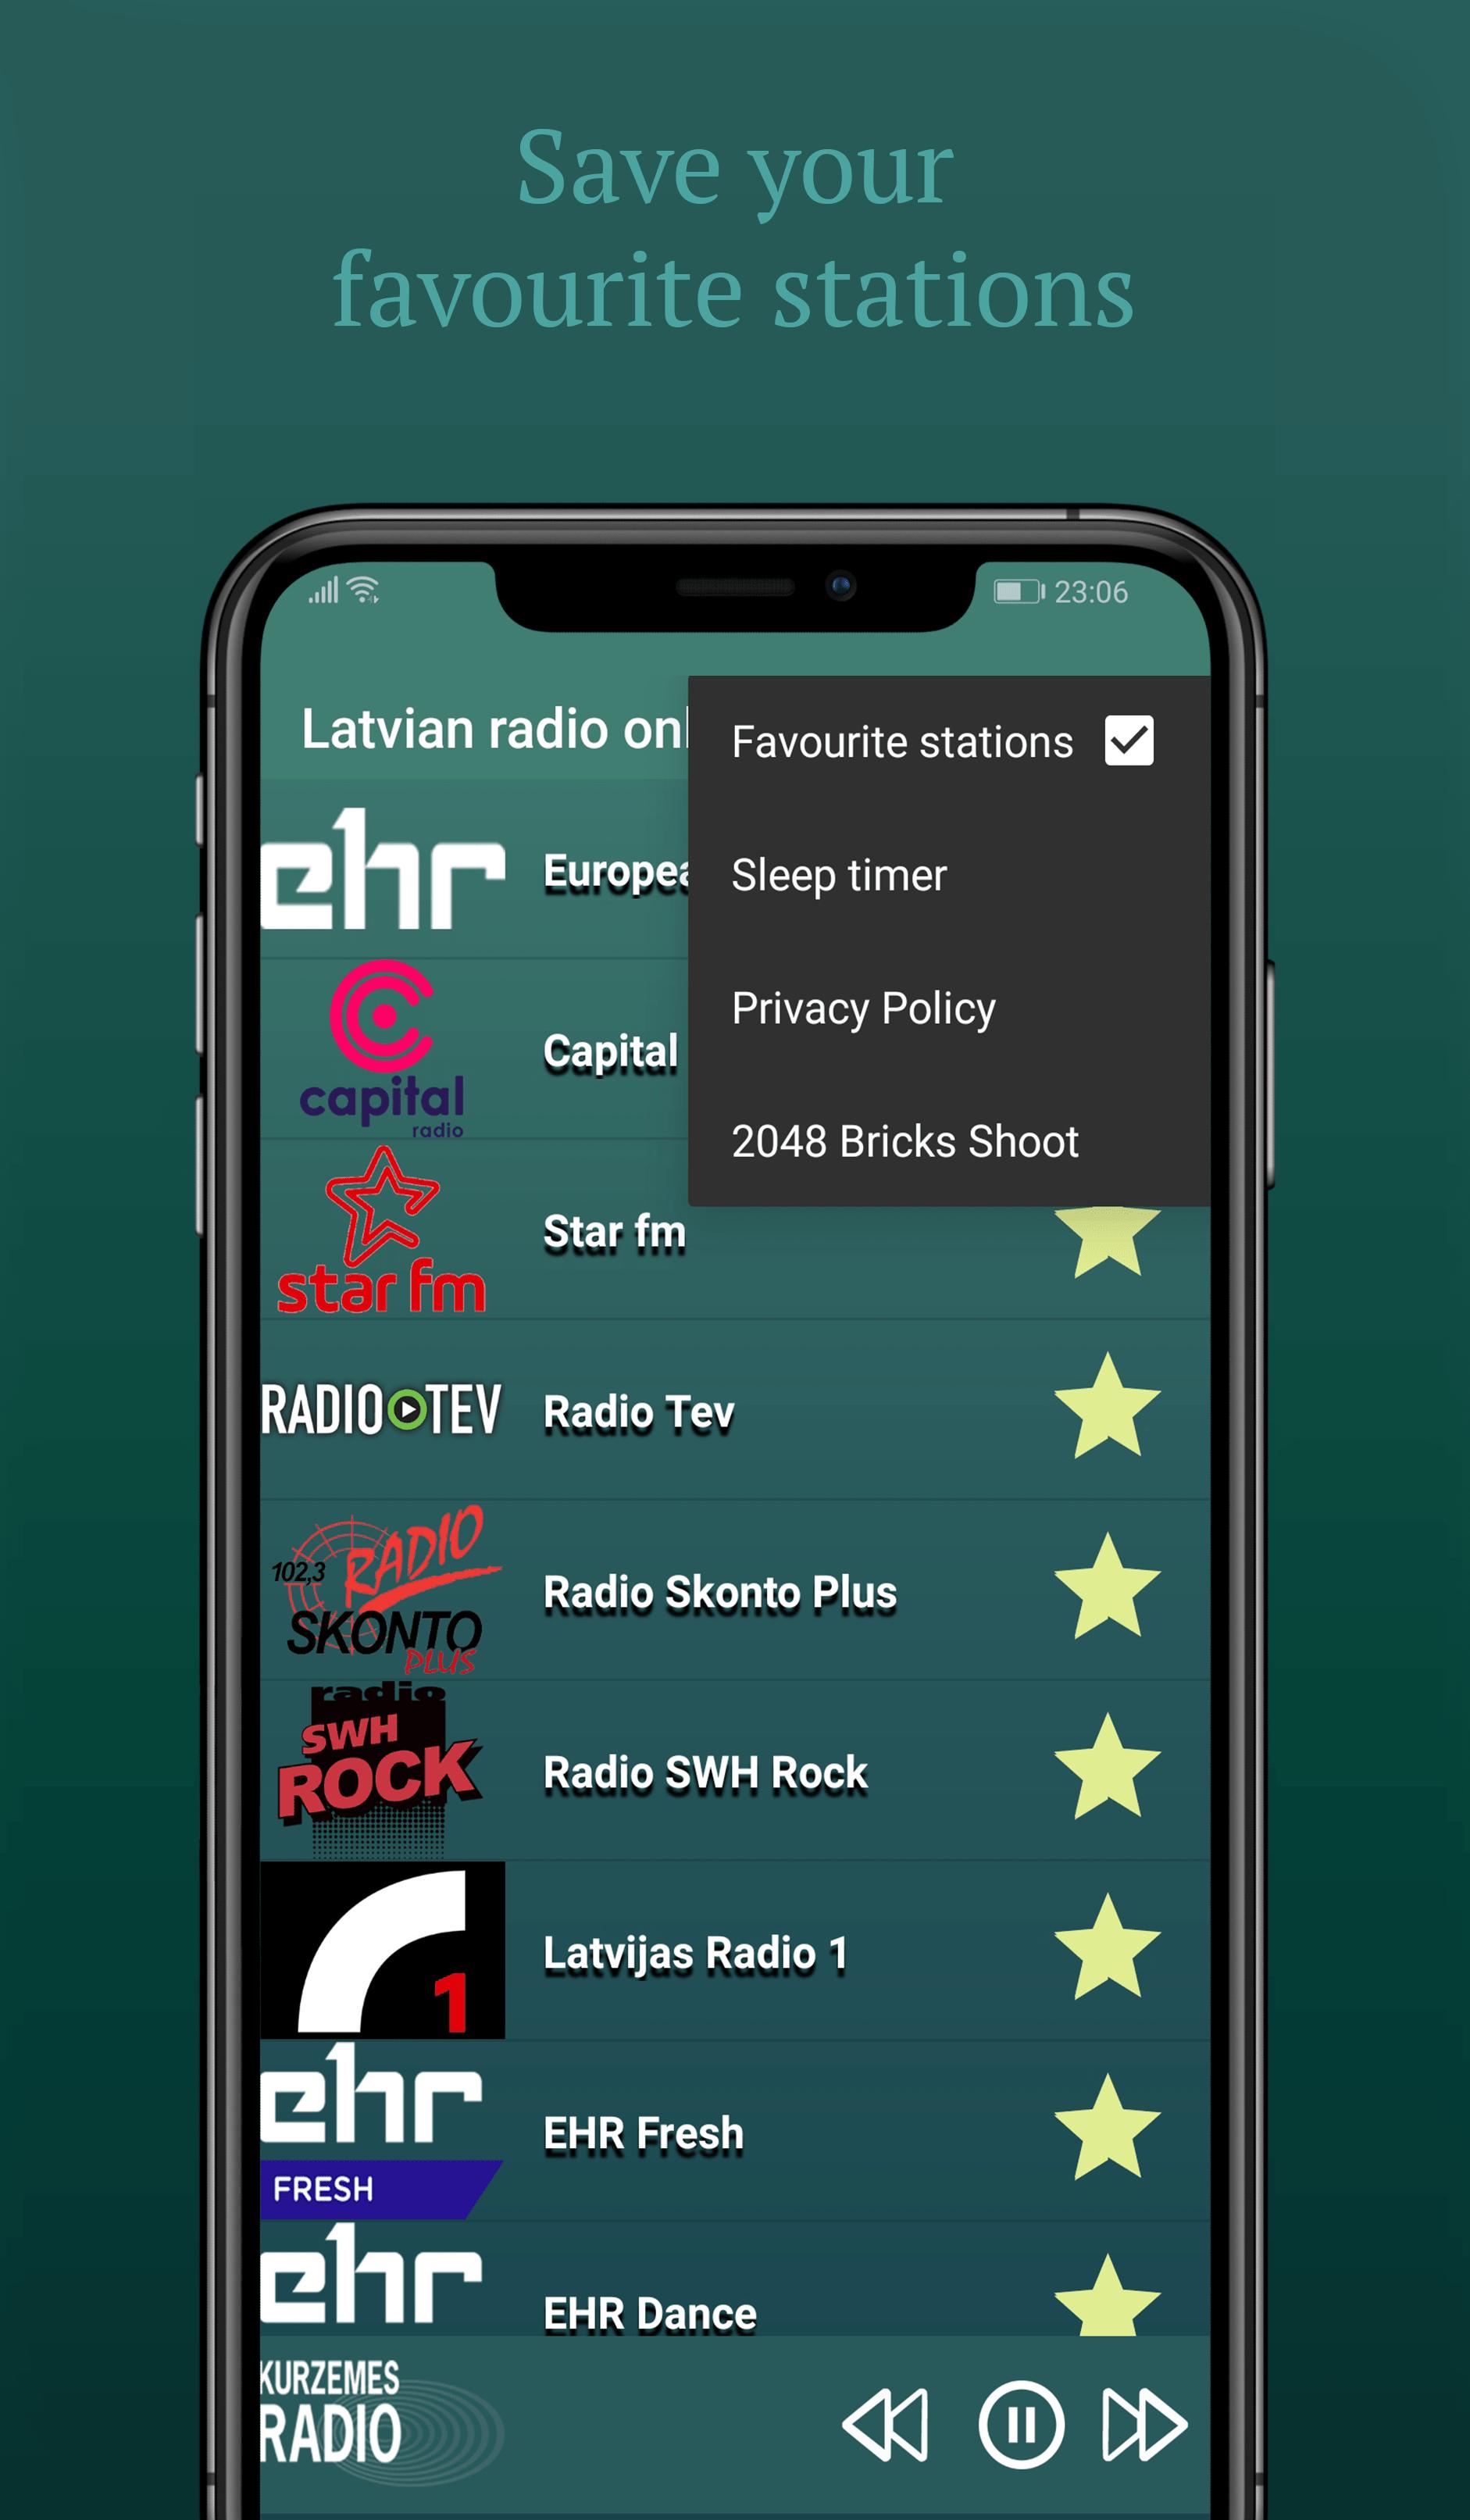 Online Latvian Radio for Android - APK Download